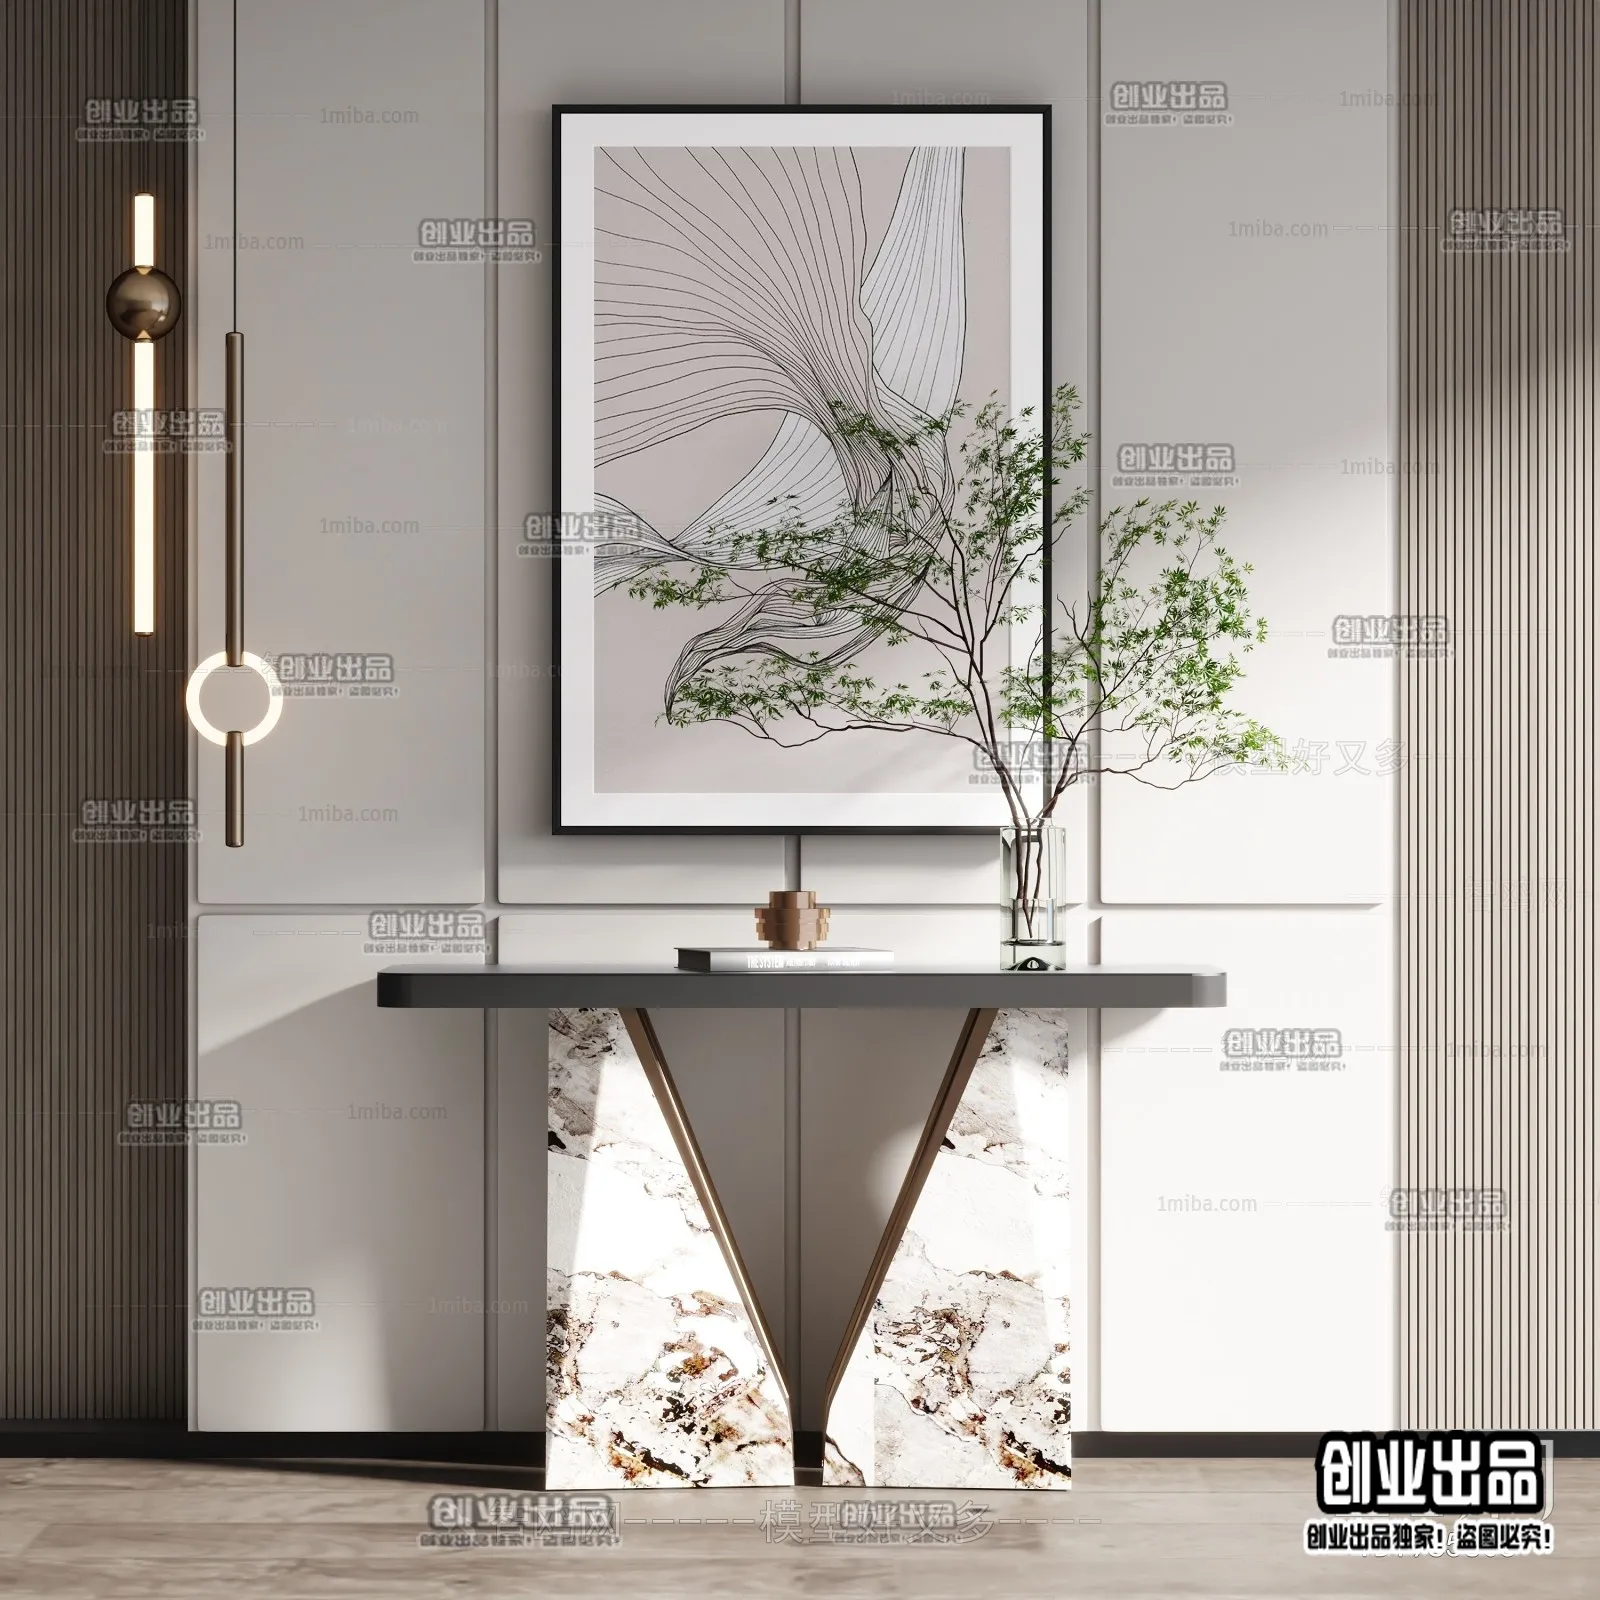 CONSOLE TABLE – 15 – FURNITURE 3D MODELS 2022 (VRAY)